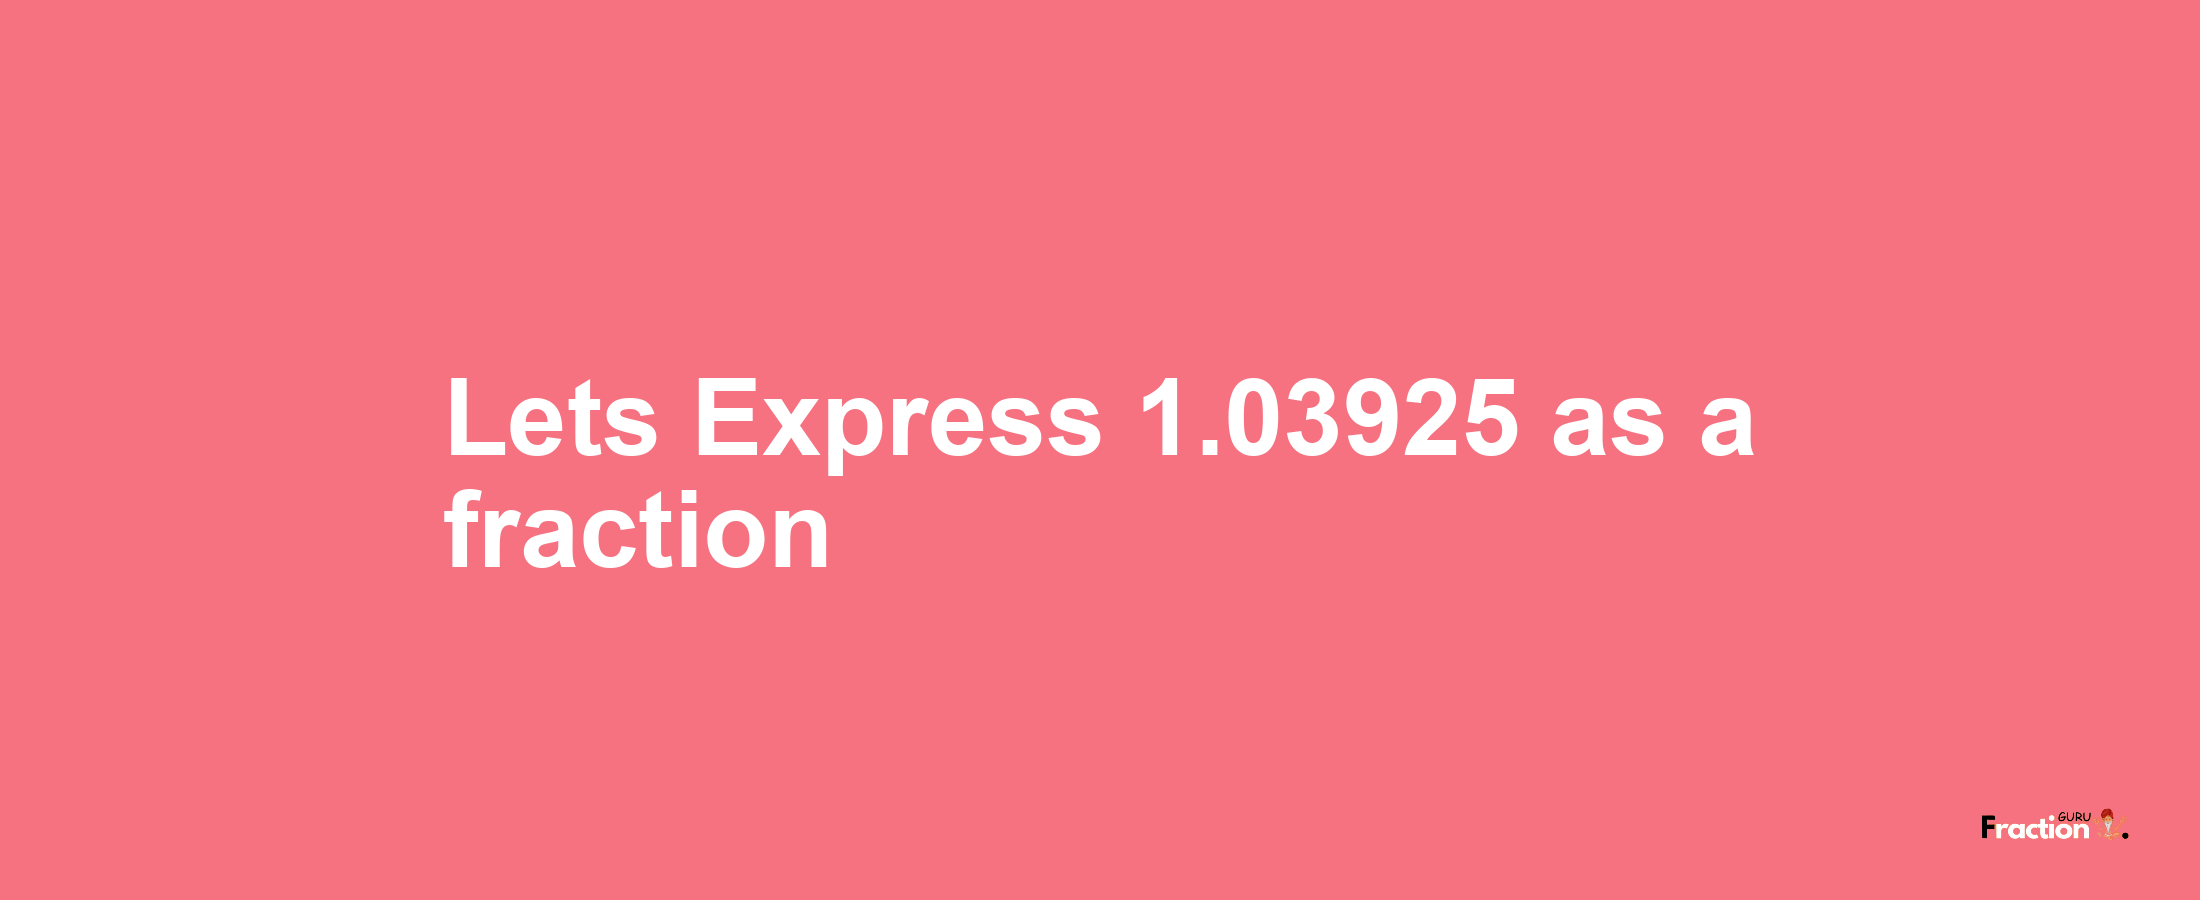 Lets Express 1.03925 as afraction